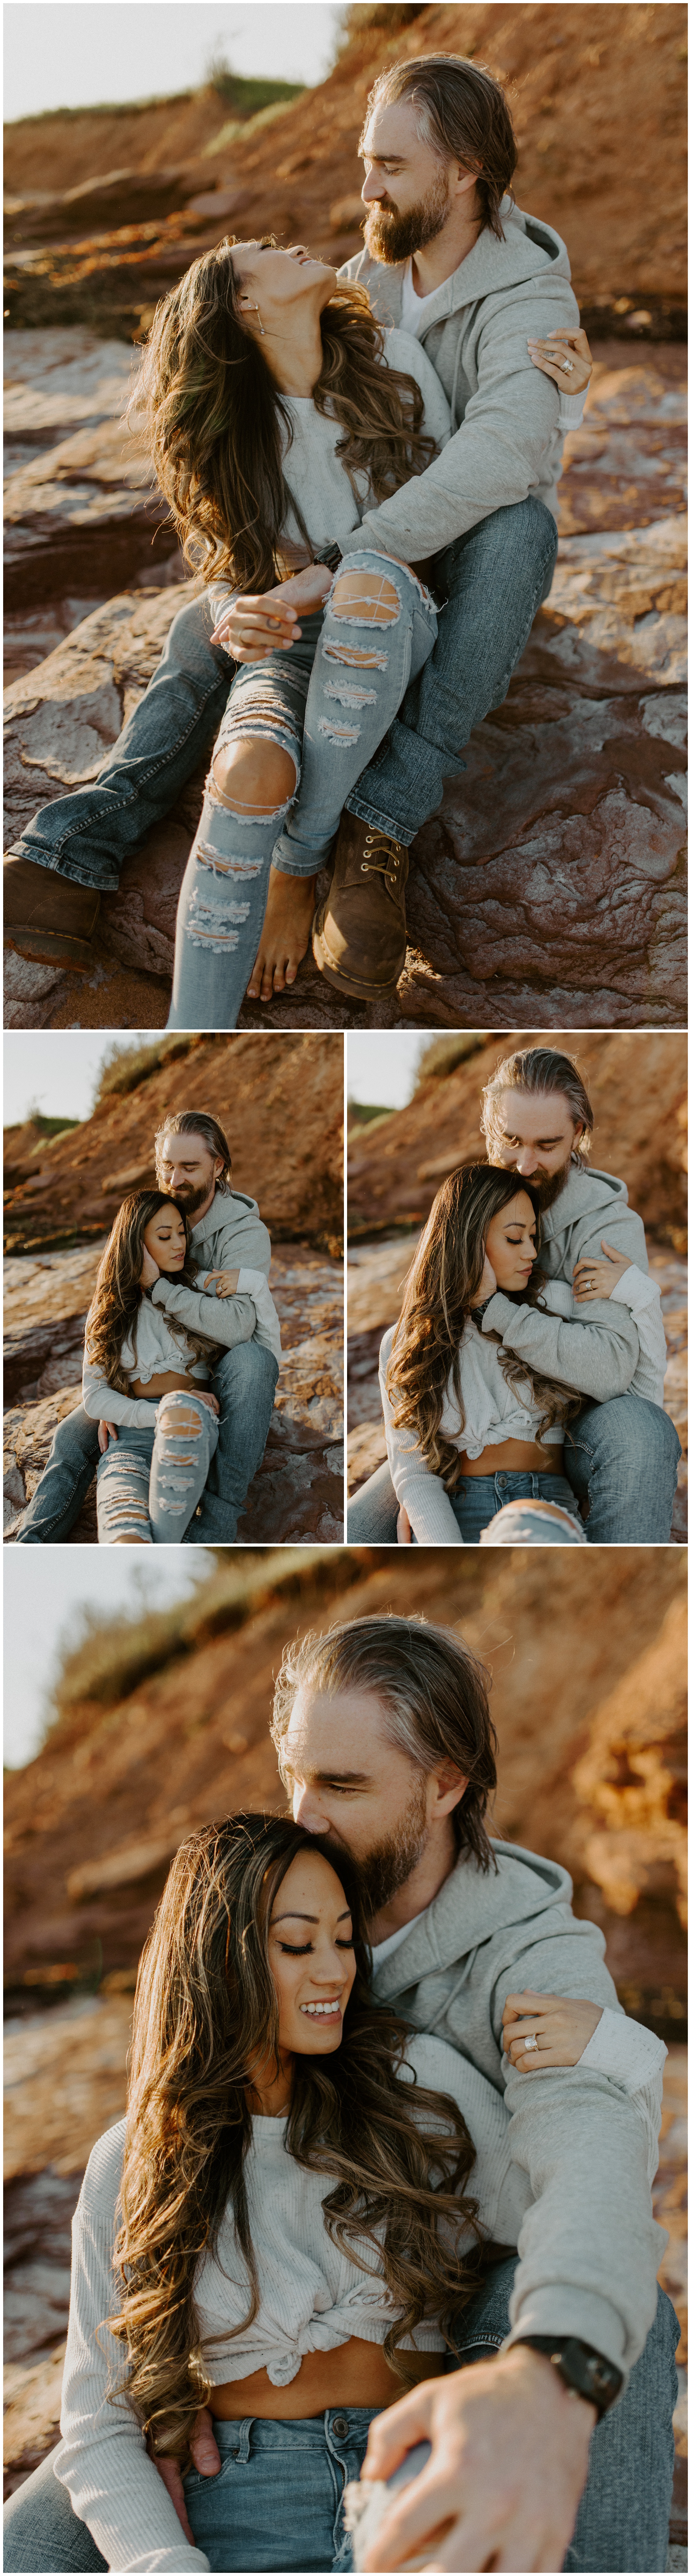 Red Sand Beach Engagements On Prince Edward Island at Sunset | Jessica Heron Images_0005.jpg